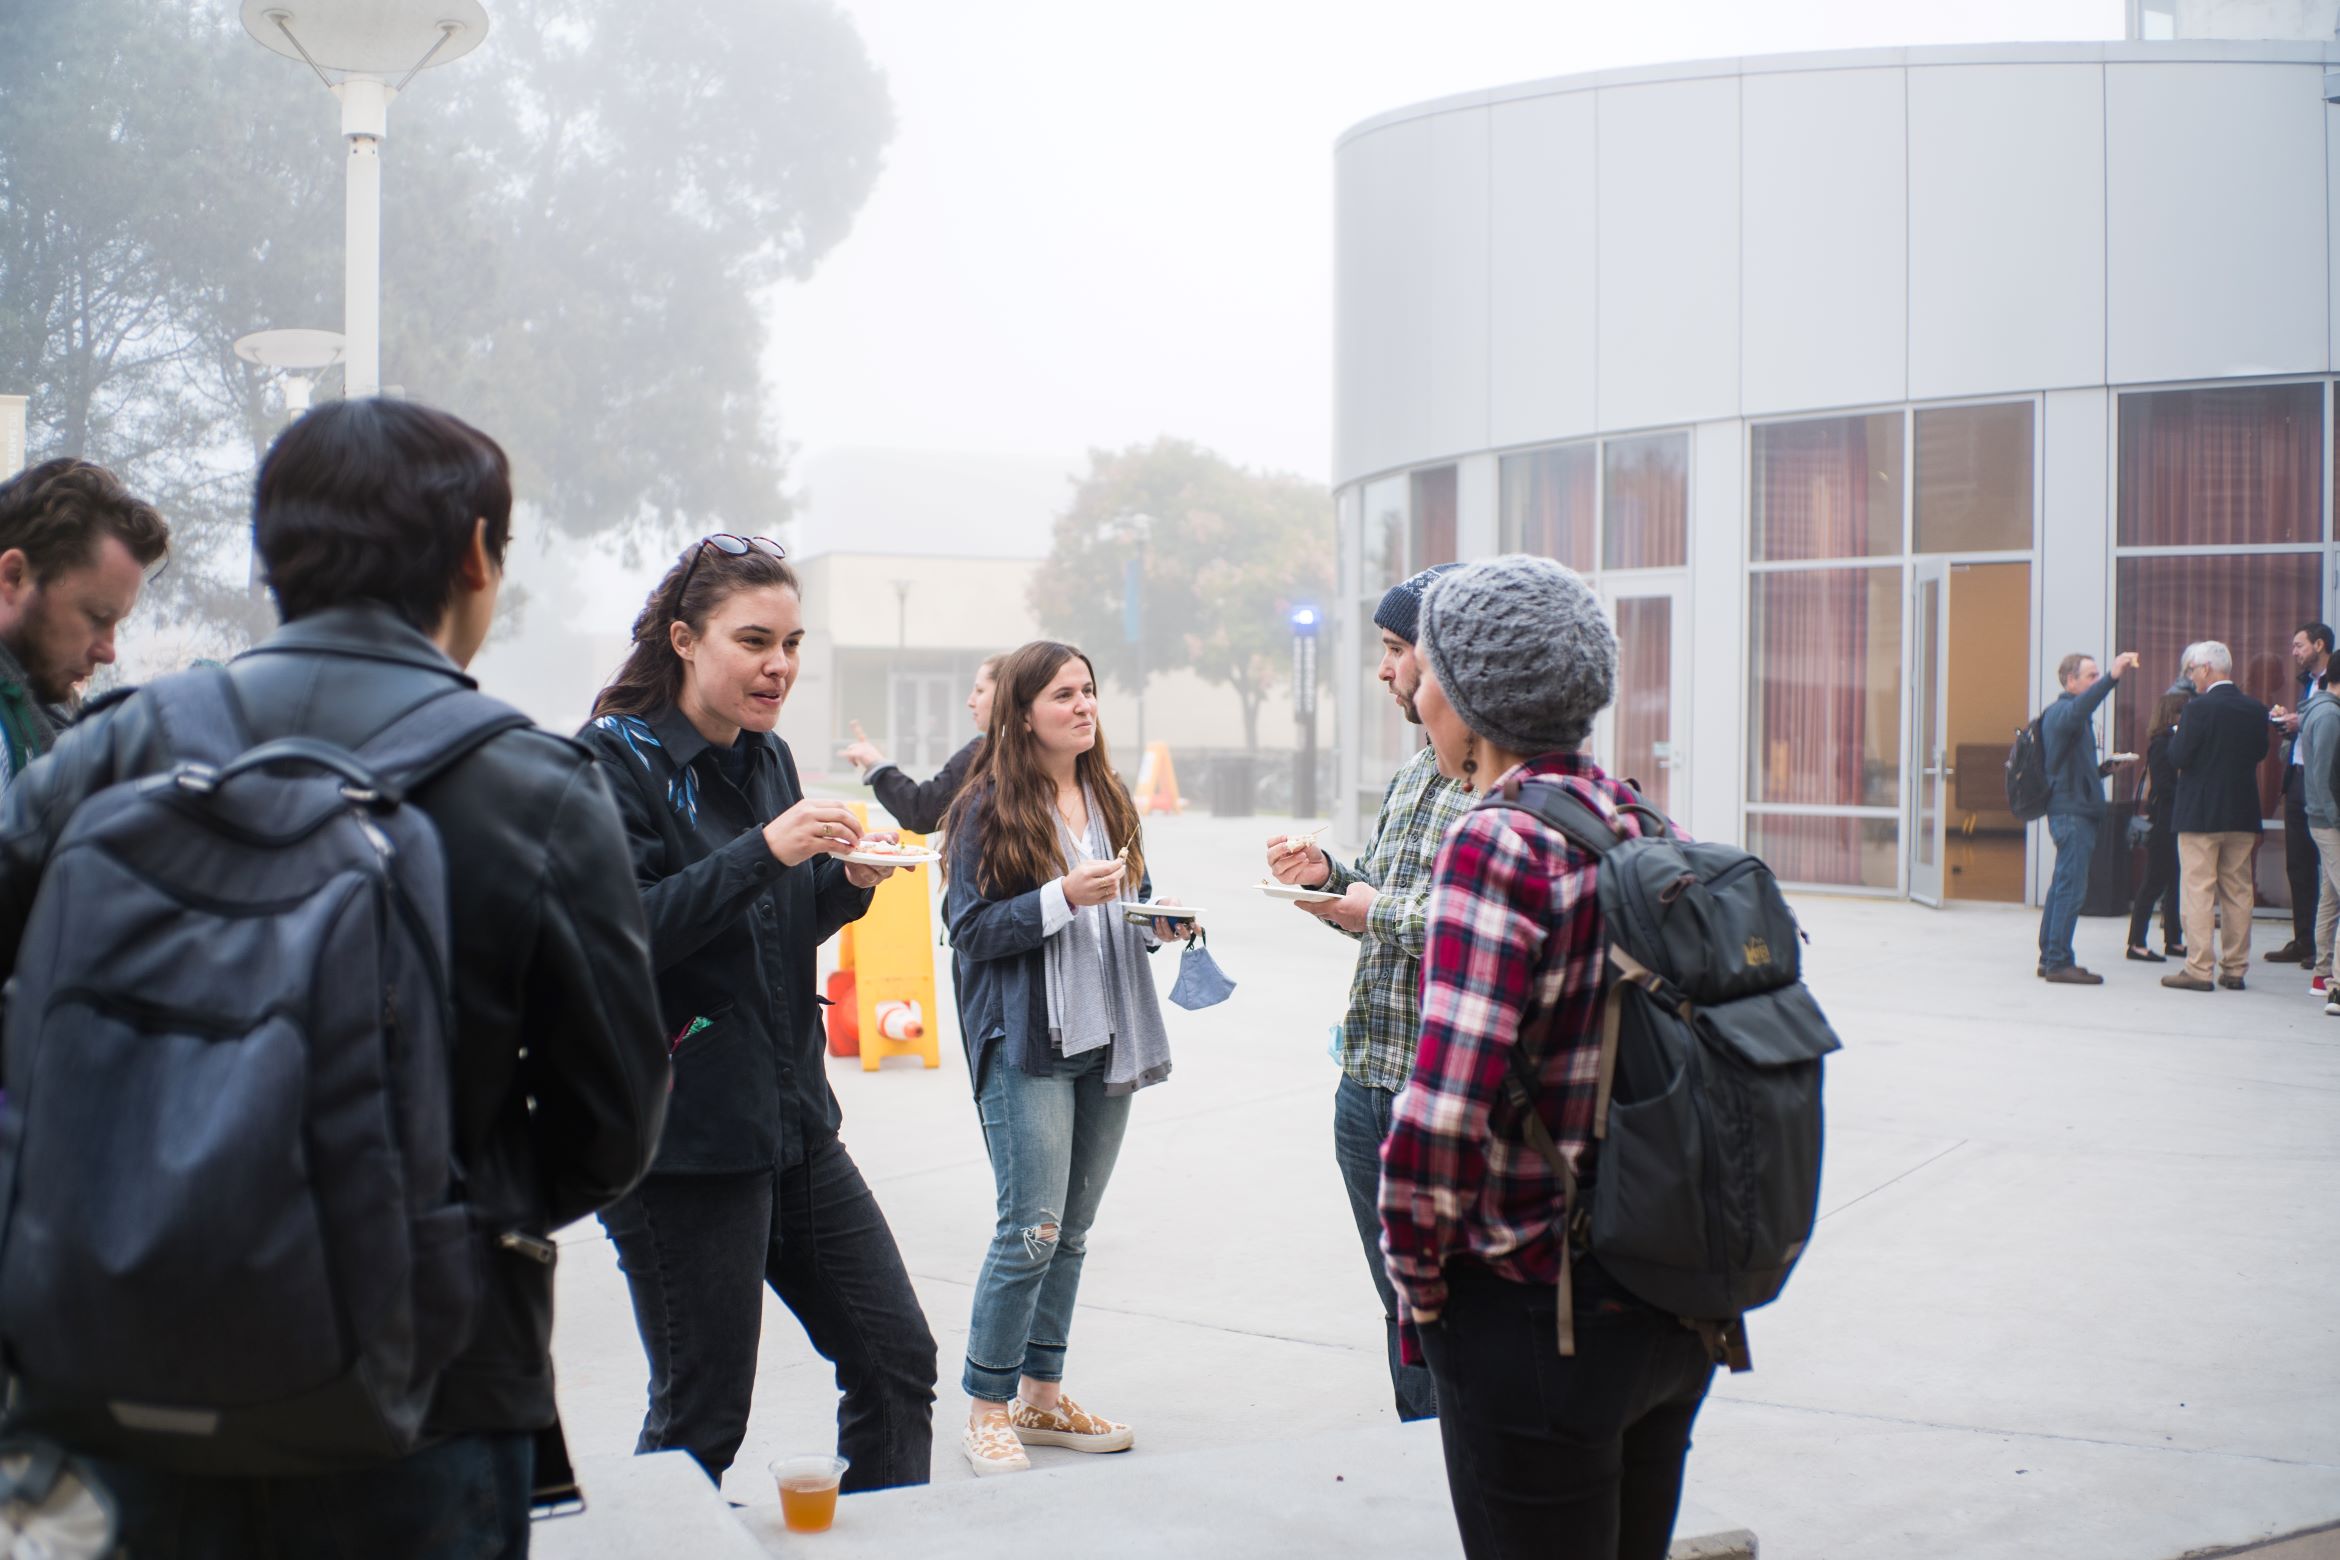 Students outside chatting during a wildfire lecture